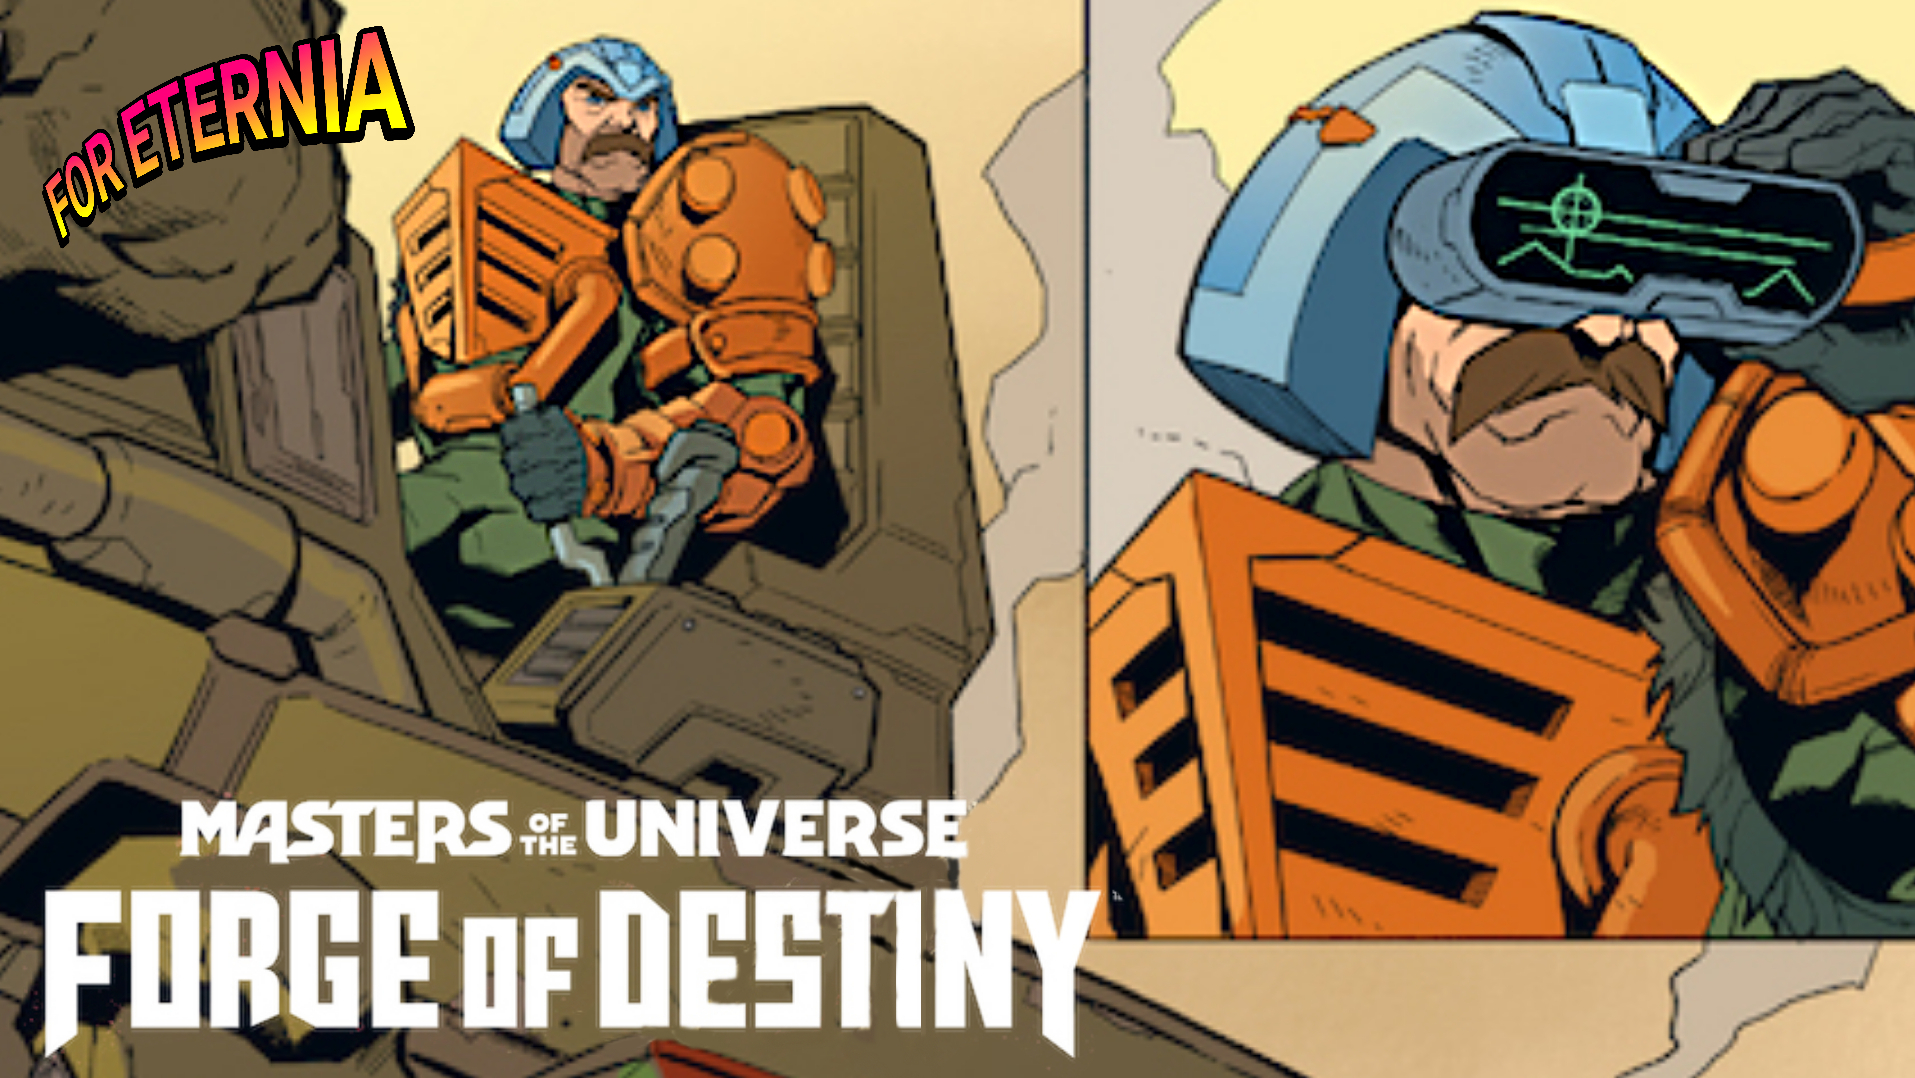 Five Page Preview of Dark Horse Comics ”Masters of the Universe: Forge of Destiny ” Issue #2 is Released